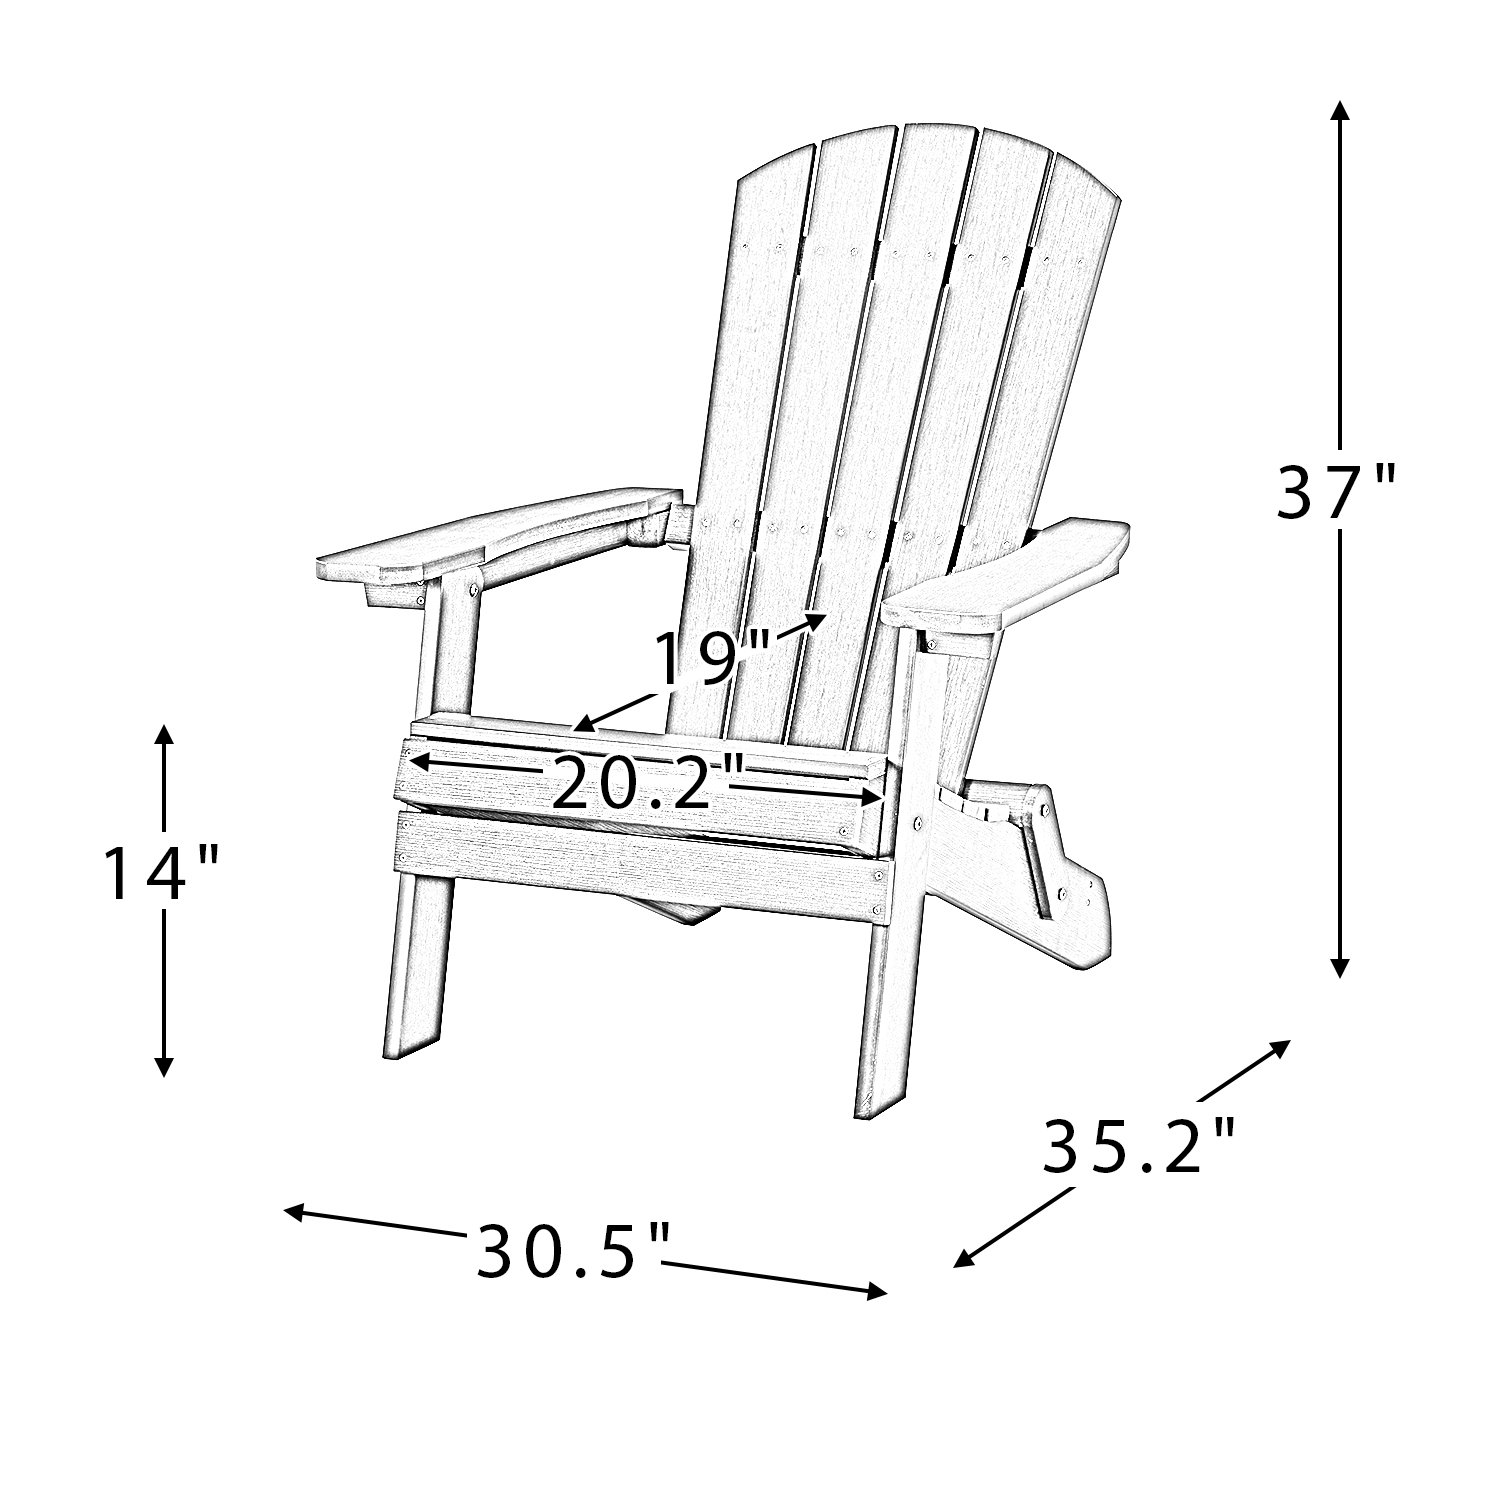 Folding Plastic Chair,Folding All-Weather Patio Chair,High Back Plastic Resin Deck Chair,Painted Weather Resistant Chair for Garden Backyard Porch,Easy to Fold Move & Maintain,Outdoor Furniture,White - image 3 of 7